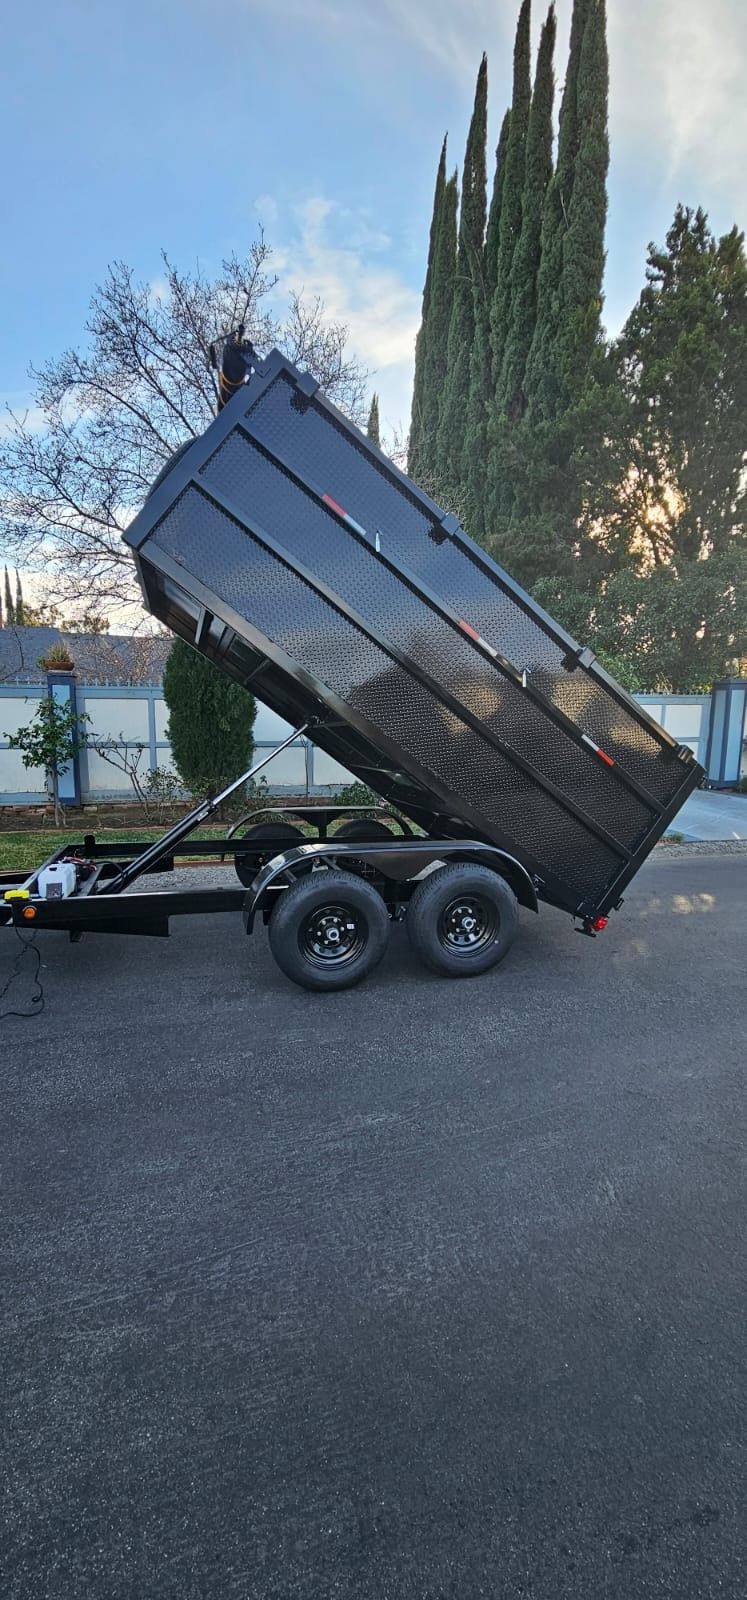 NEW DUMP TRAILER 12FT EQUIPPED ROLLING TARP AND SPARE TIRE REMOTE CONTROL ELECTRIC BRAKES LIGHTS,READY FOR WORK TITLE IN HAND FOR ANY QUESTION TEXT ME